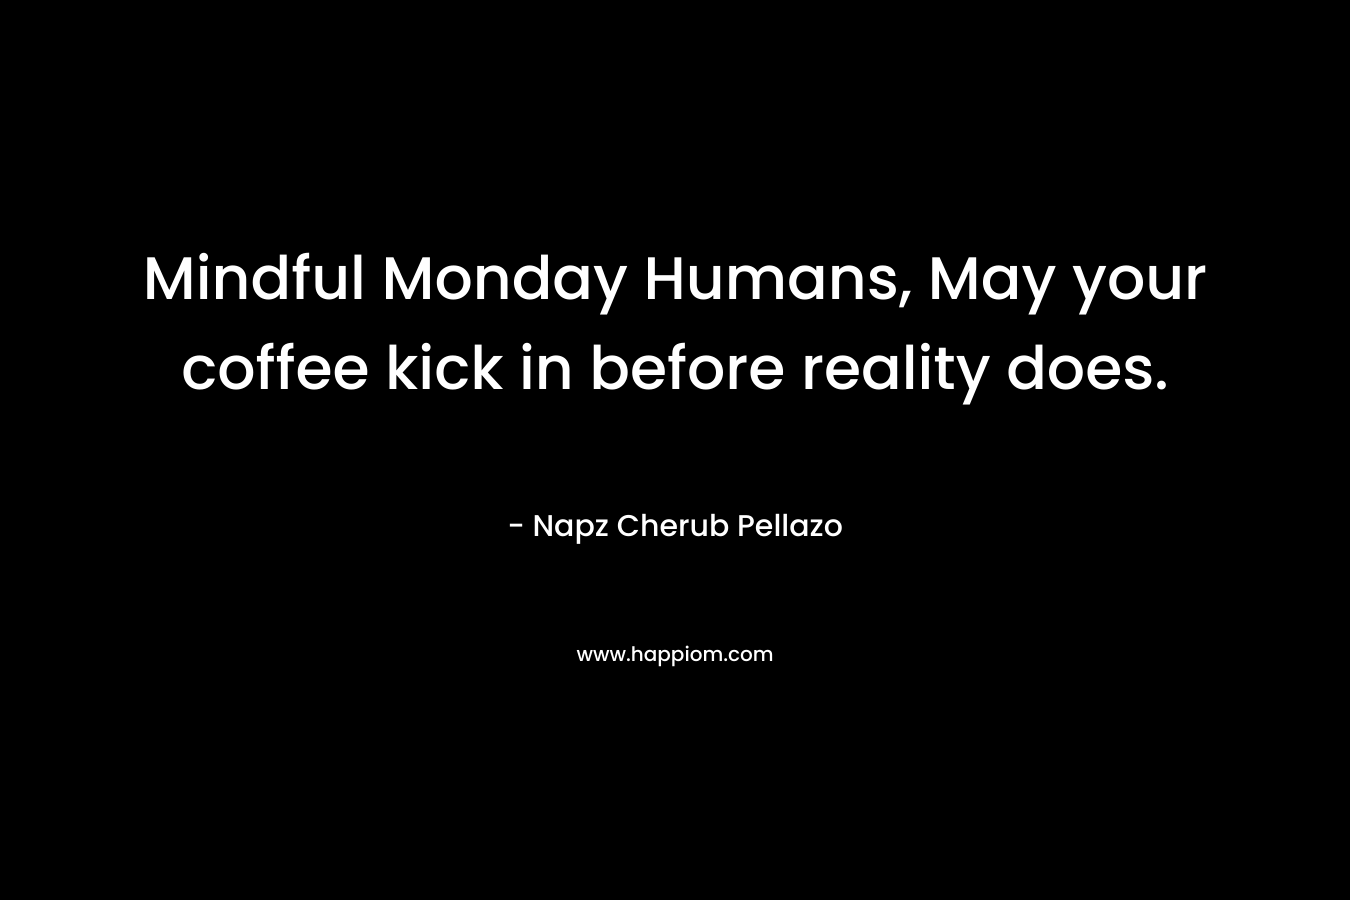 Mindful Monday Humans, May your coffee kick in before reality does. – Napz Cherub Pellazo